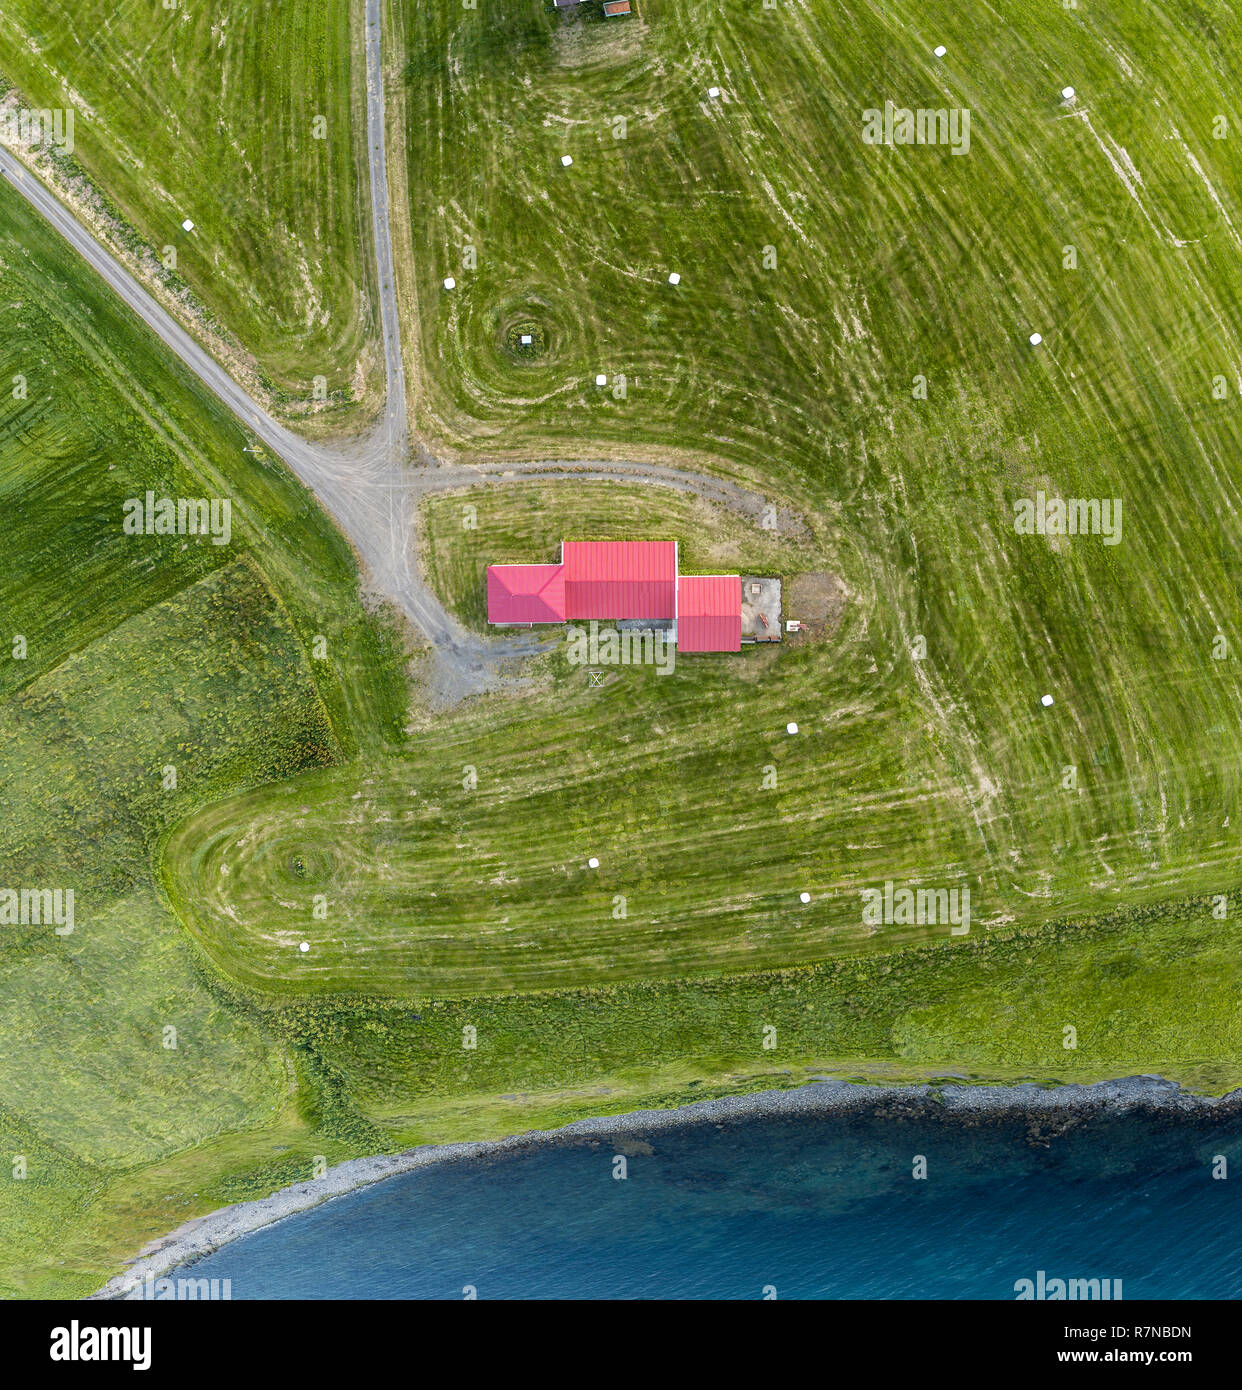 Farmland, Eyjafjordur, Iceland. This image is shot using a drone. Stock Photo